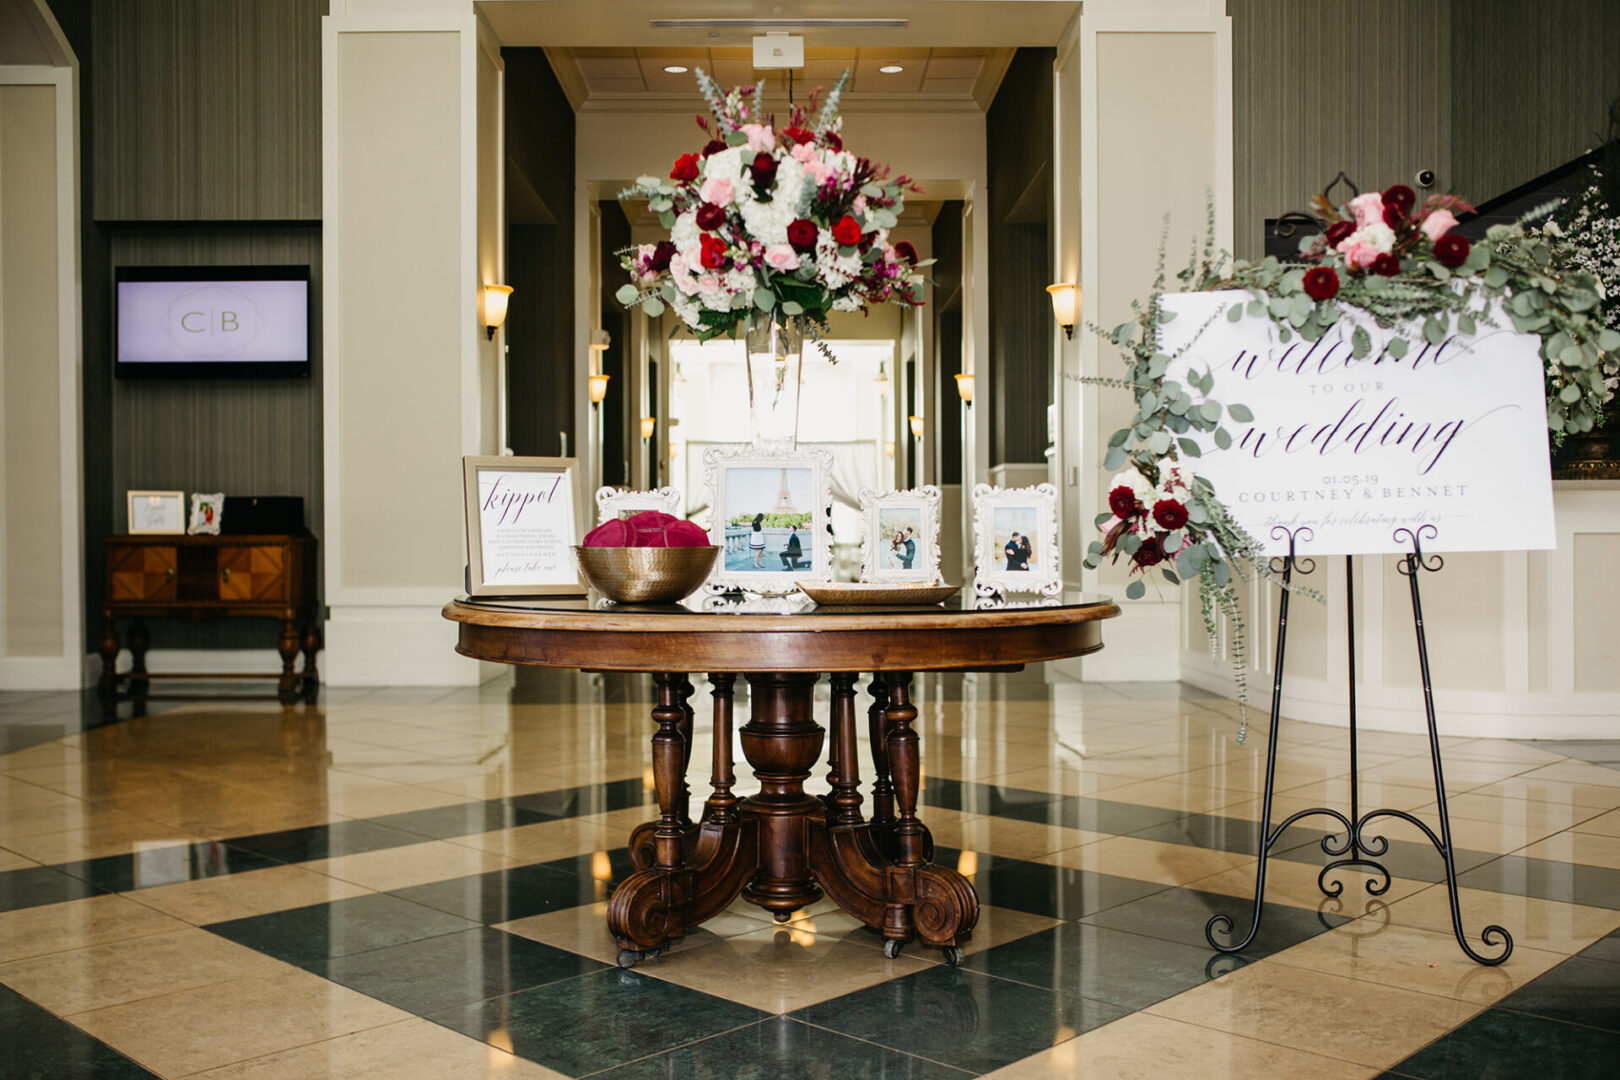 A round table in the center of a lobby.